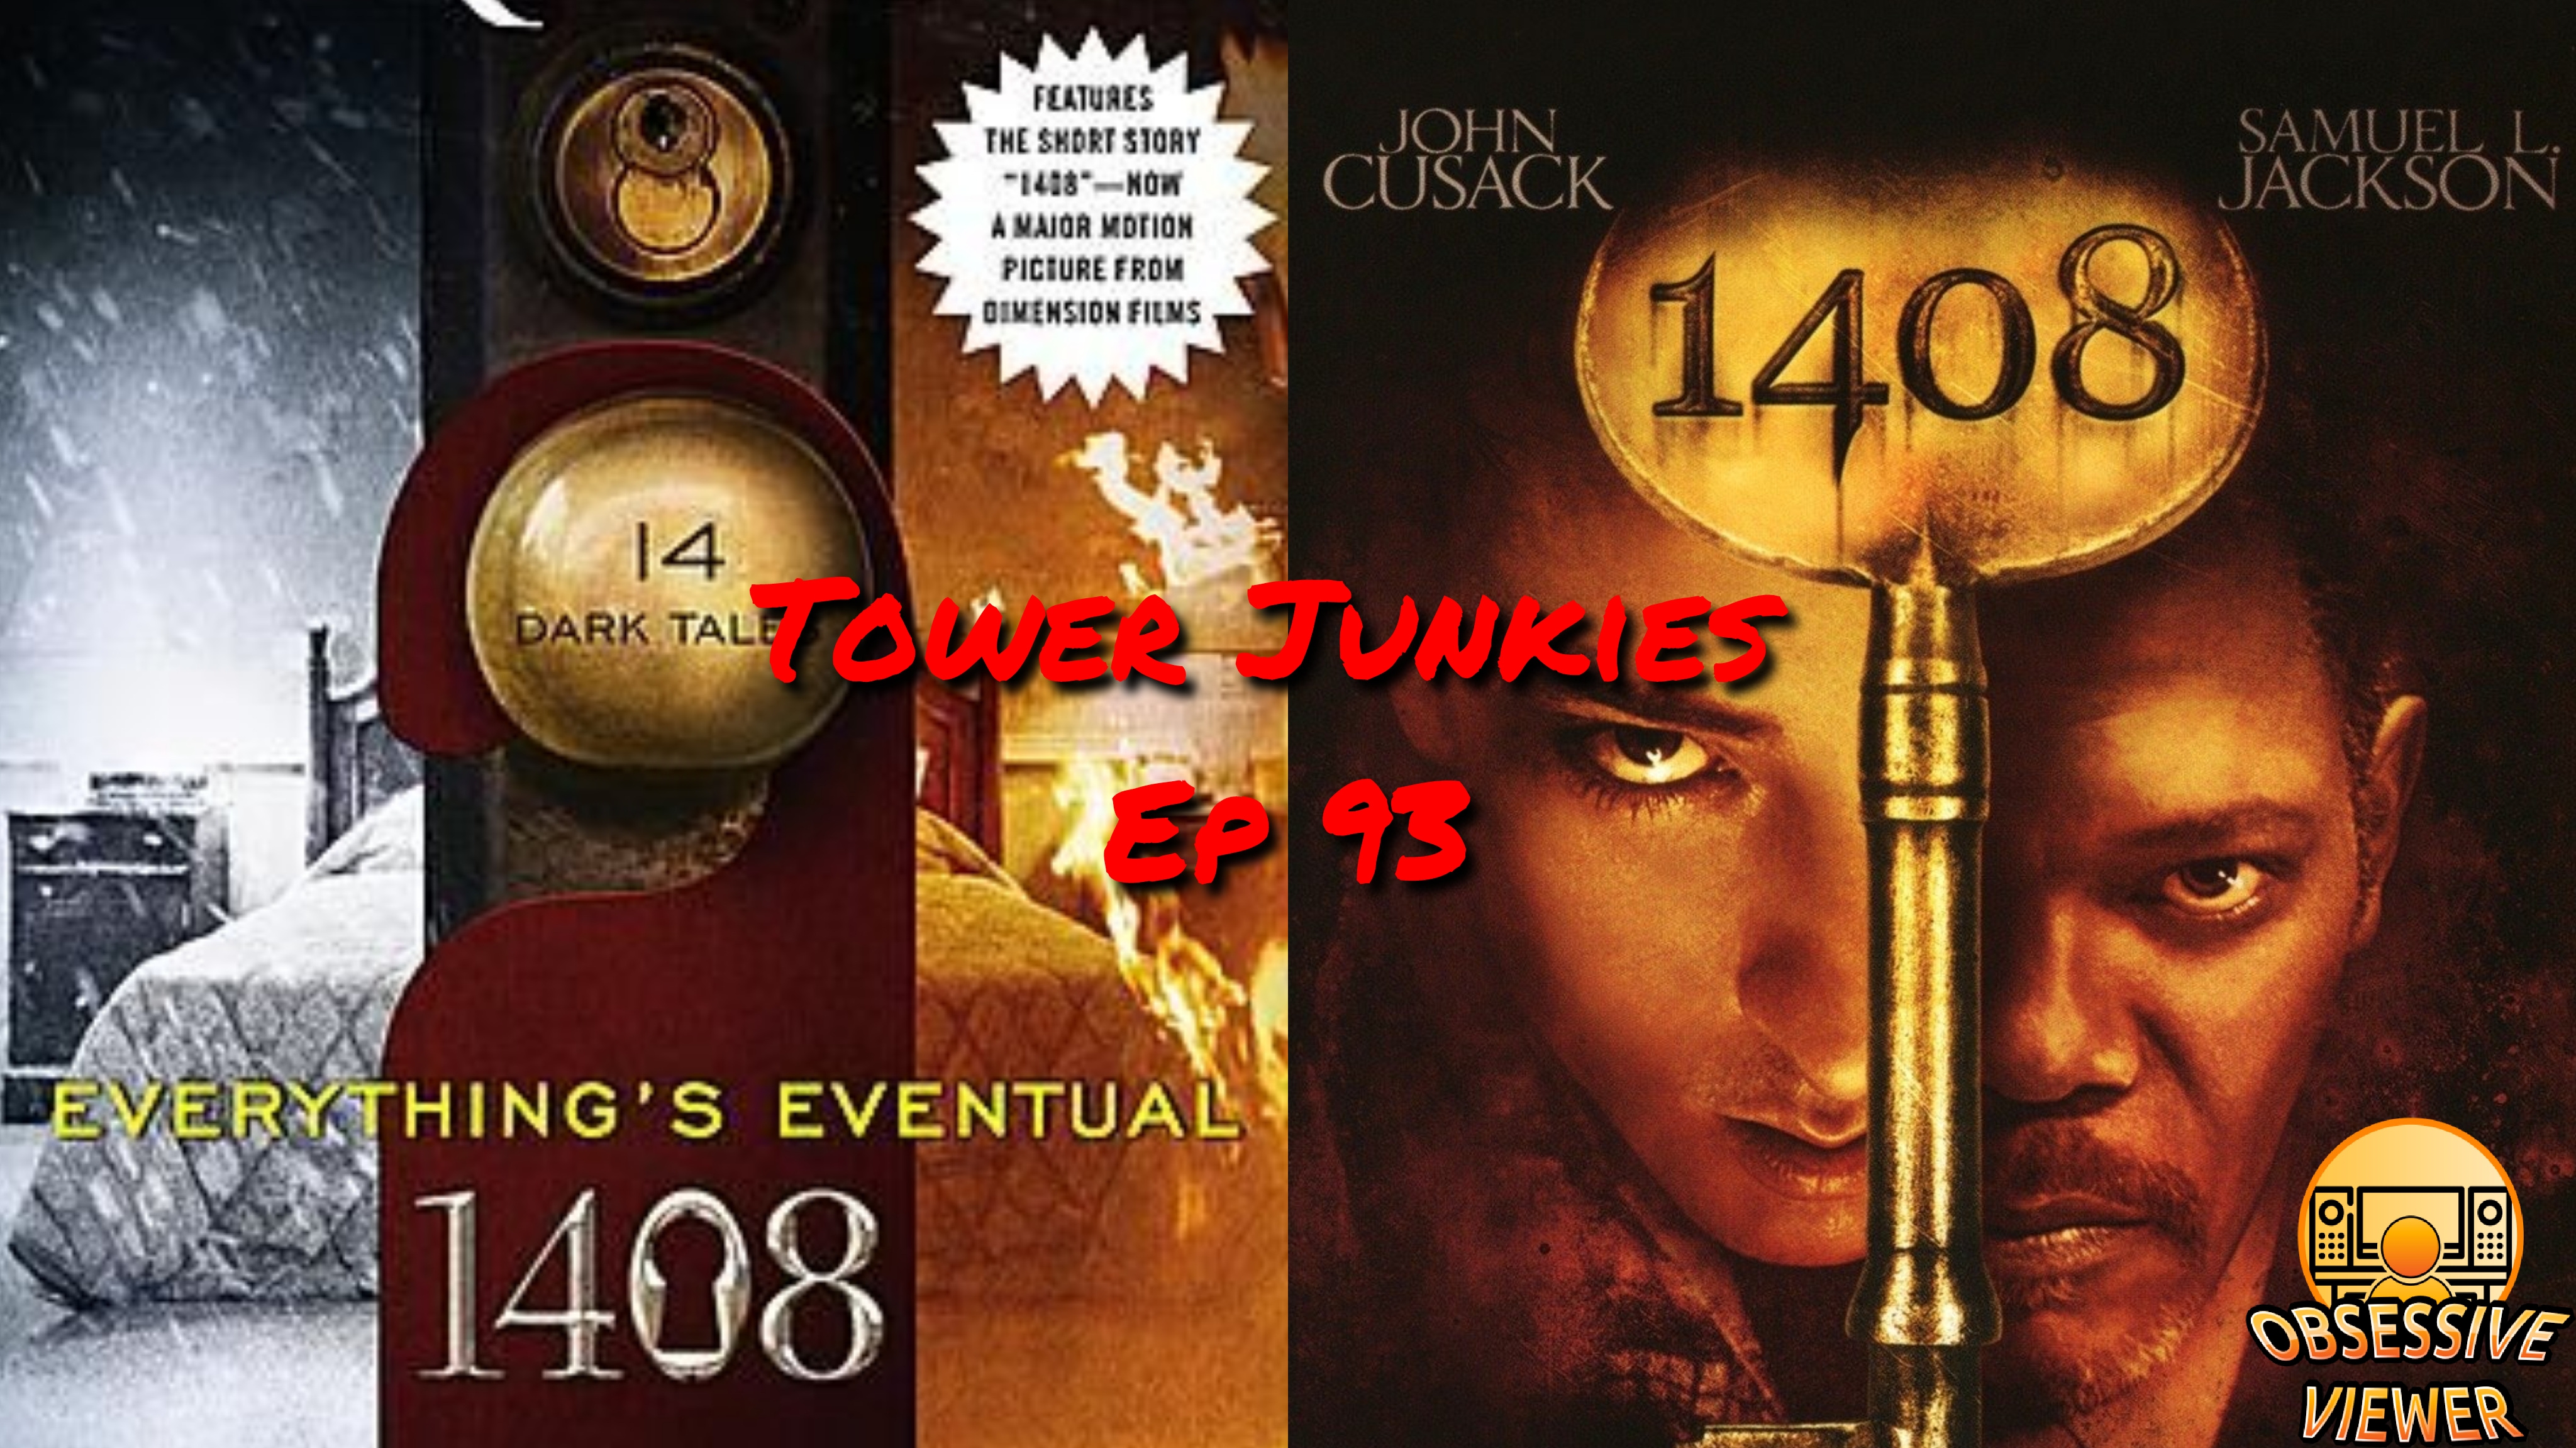 Tower Junkies – 093 – Short Story/Movie – 1408 (Everything’s Eventual) & 1408 (2007)